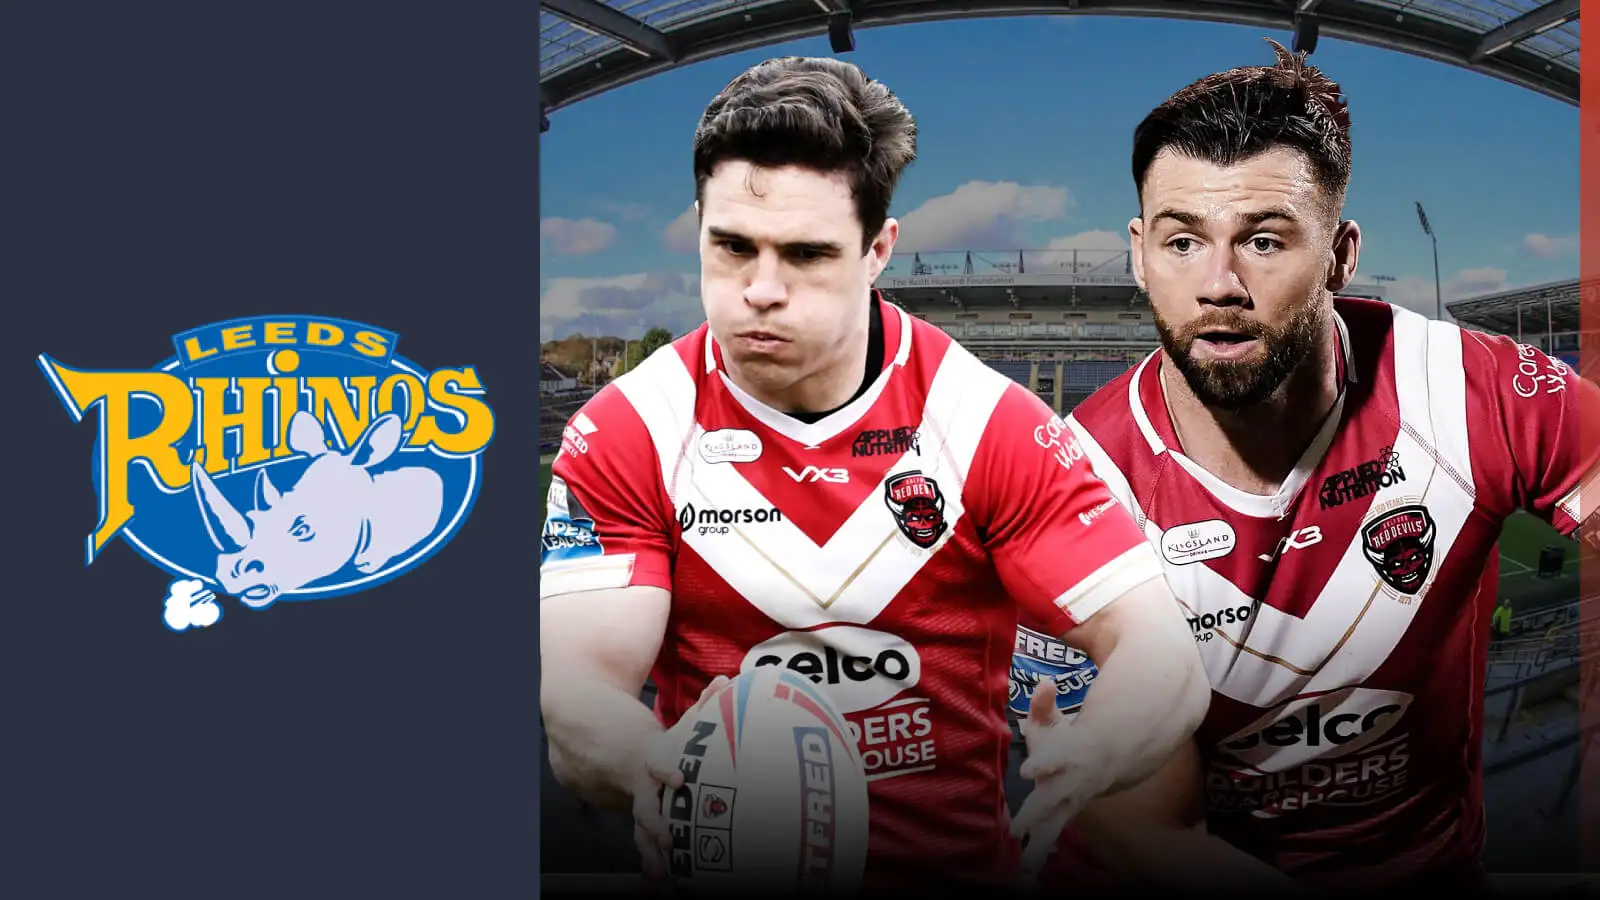 Leeds Rhinos sign Salford Red Devils duo on long-term contracts; Major acquisitions mark club’s biggest investment in 26 years